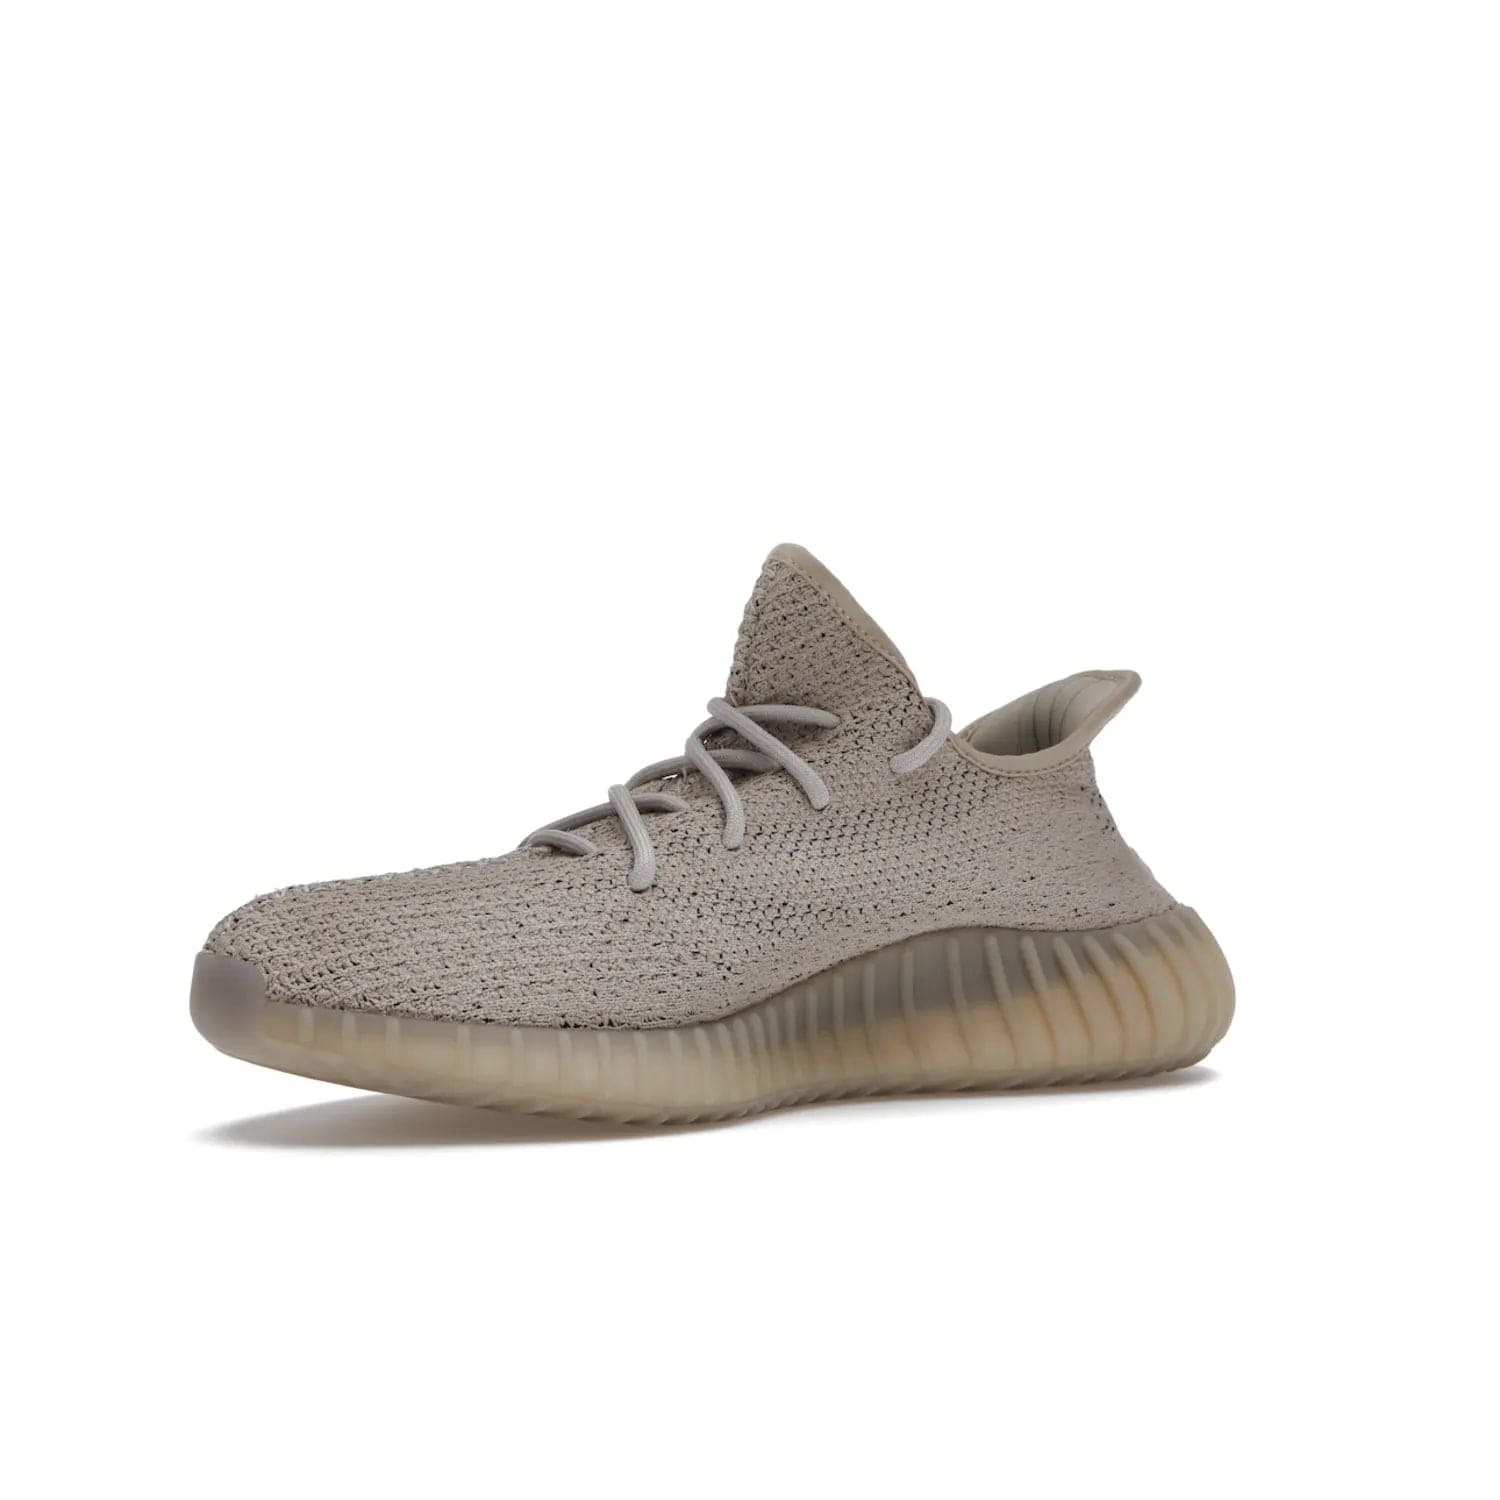 adidas Yeezy Boost 350 V2 Slate - Image 16 - Only at www.BallersClubKickz.com - Adidas Yeezy Boost 350 V2 Slate Core Black Slate featuring Primeknit upper, Boost midsole and semi-translucent TPU cage. Launched on 3/9/2022, retailed at $230.